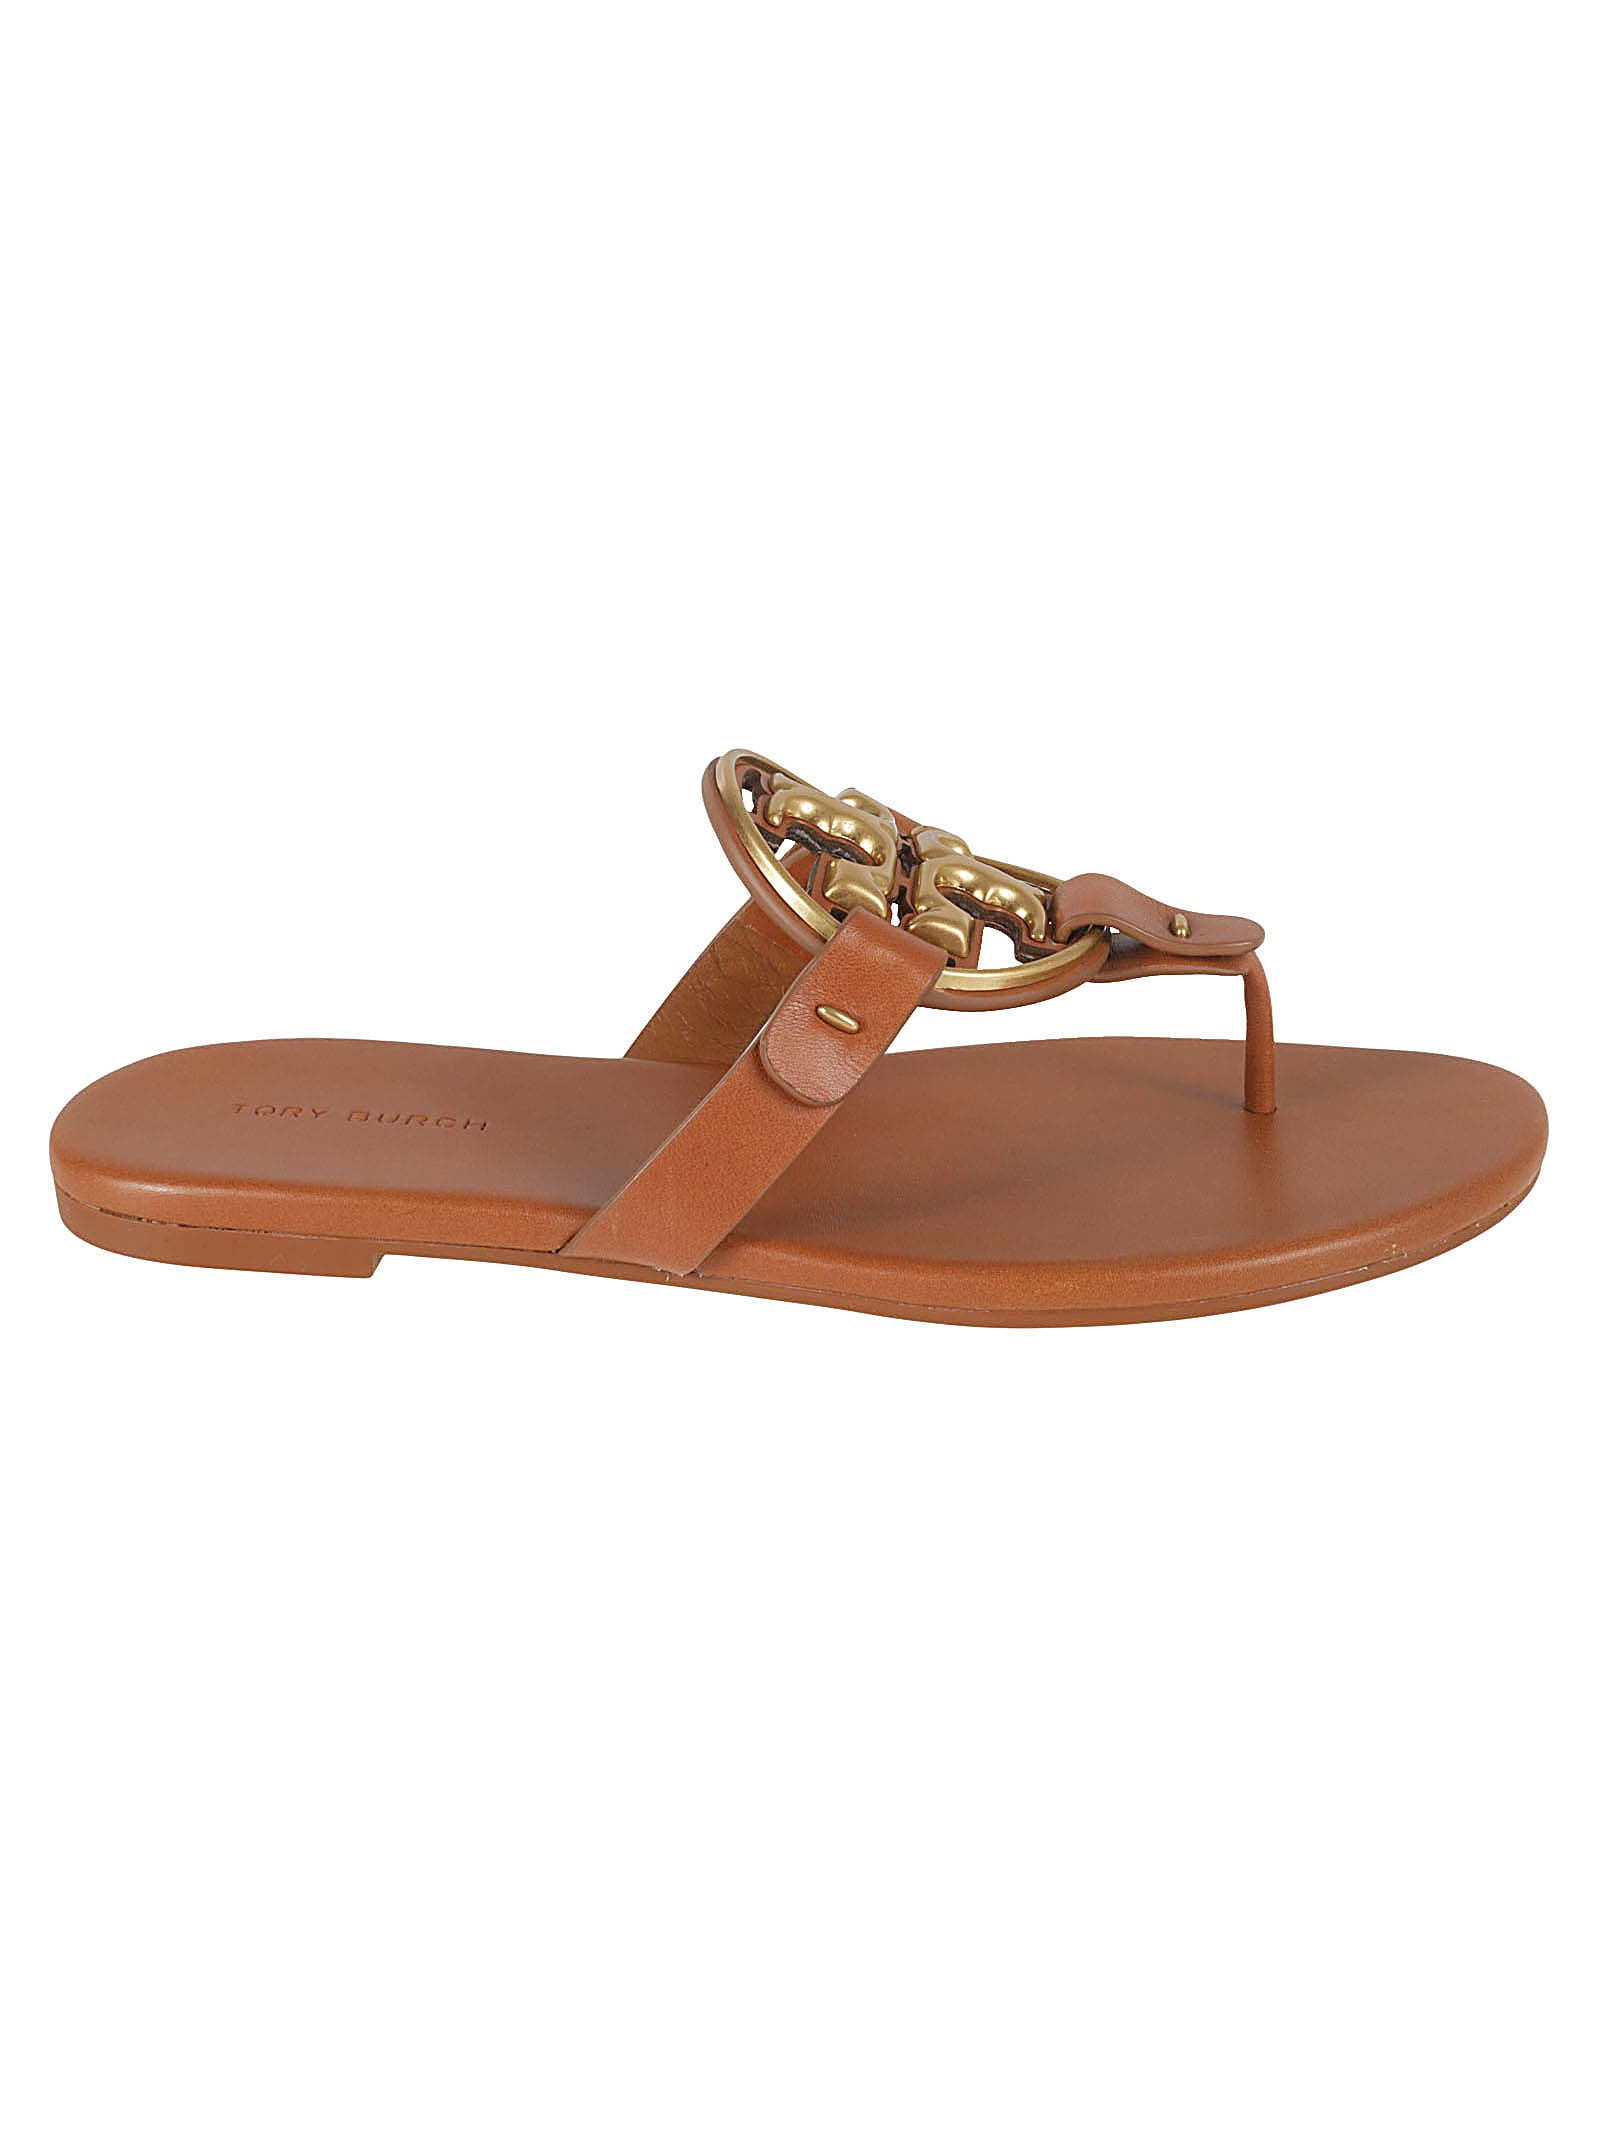 Tory Burch Metal Miller Soft Sliders In Bourbon Miele/gold